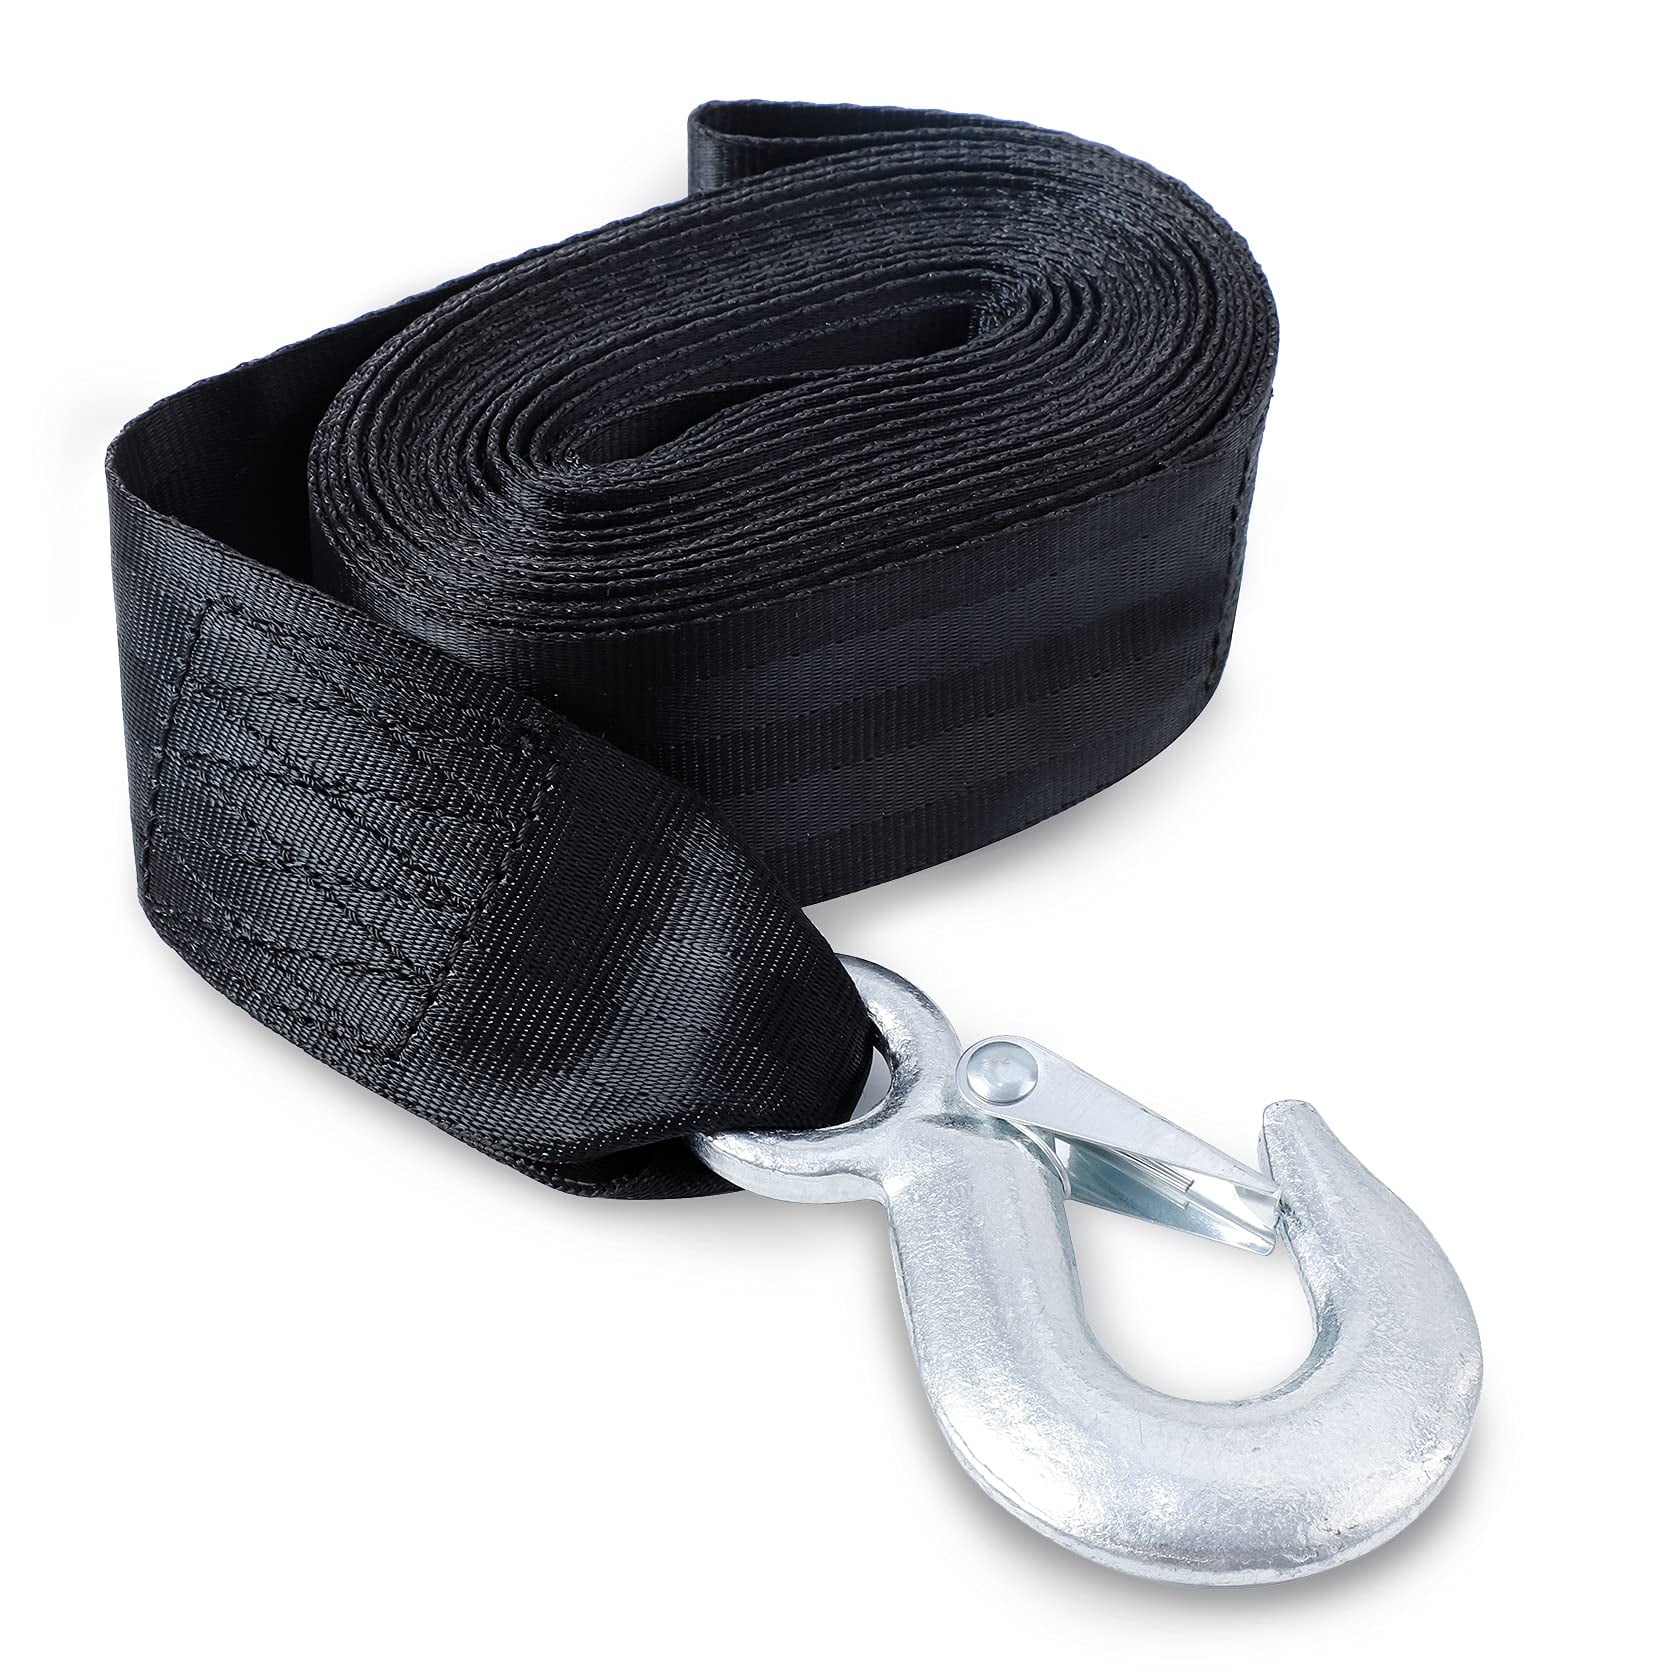 CarBole Trailer Winch Strap 2' x 20' with Safety Snap Hook 10000 lbs Black  - Walmart.com